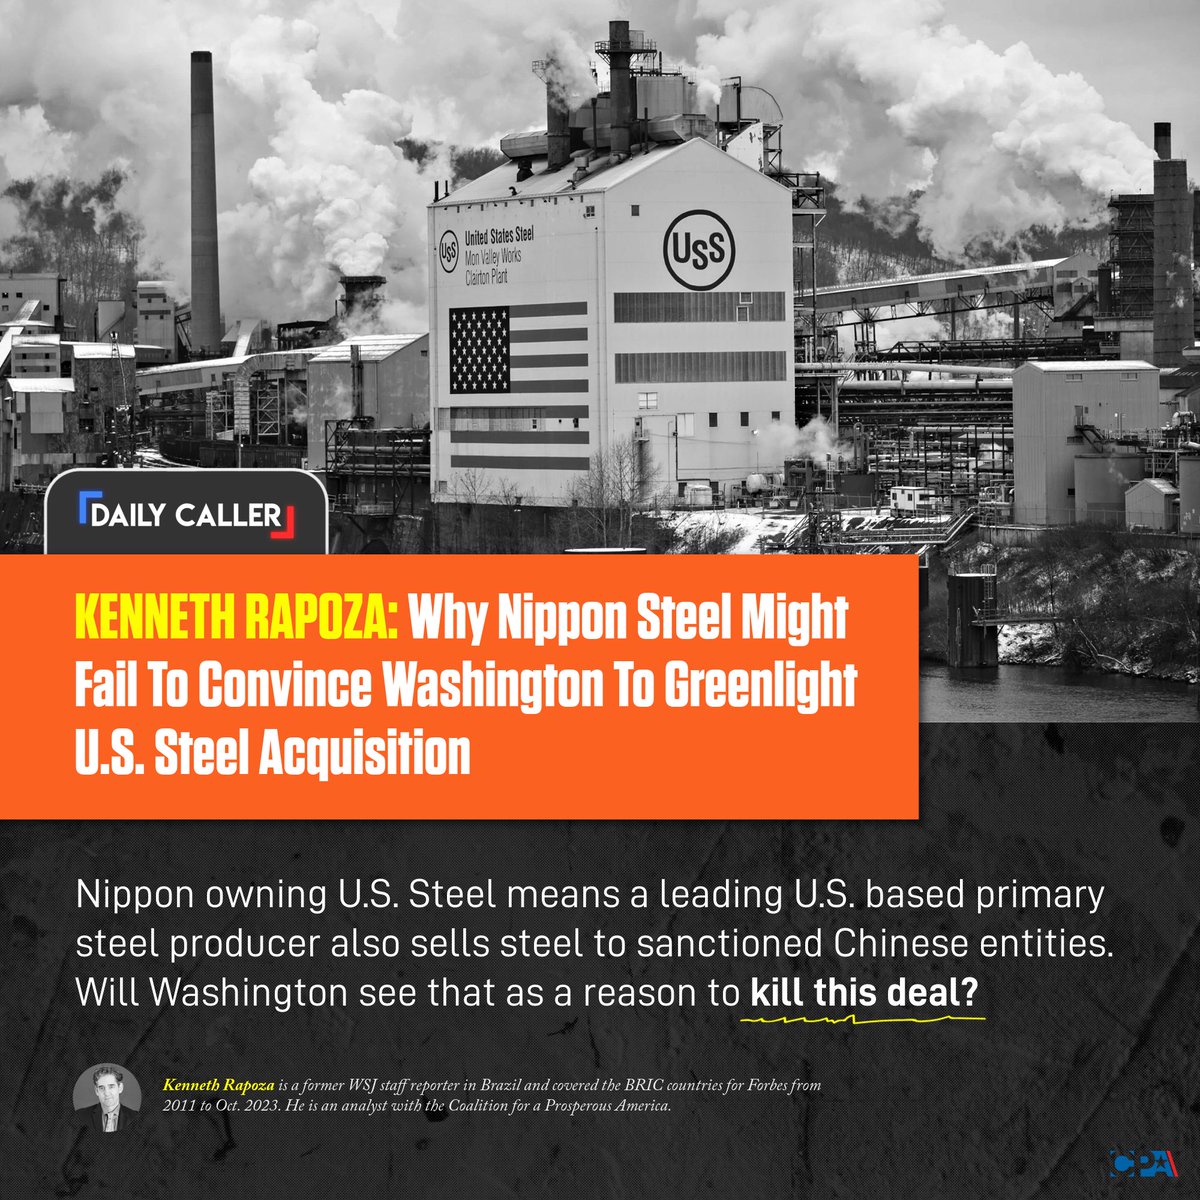 Japan’s Nippon Steel has inched closer to buying Pittsburgh-based U.S. Steel now that the U.S. company’s shareholders have approved of the Dec. 18 acquisition offer. Only Washington can stand in the way. But will it? 🔗 tinyurl.com/2sn2ntze